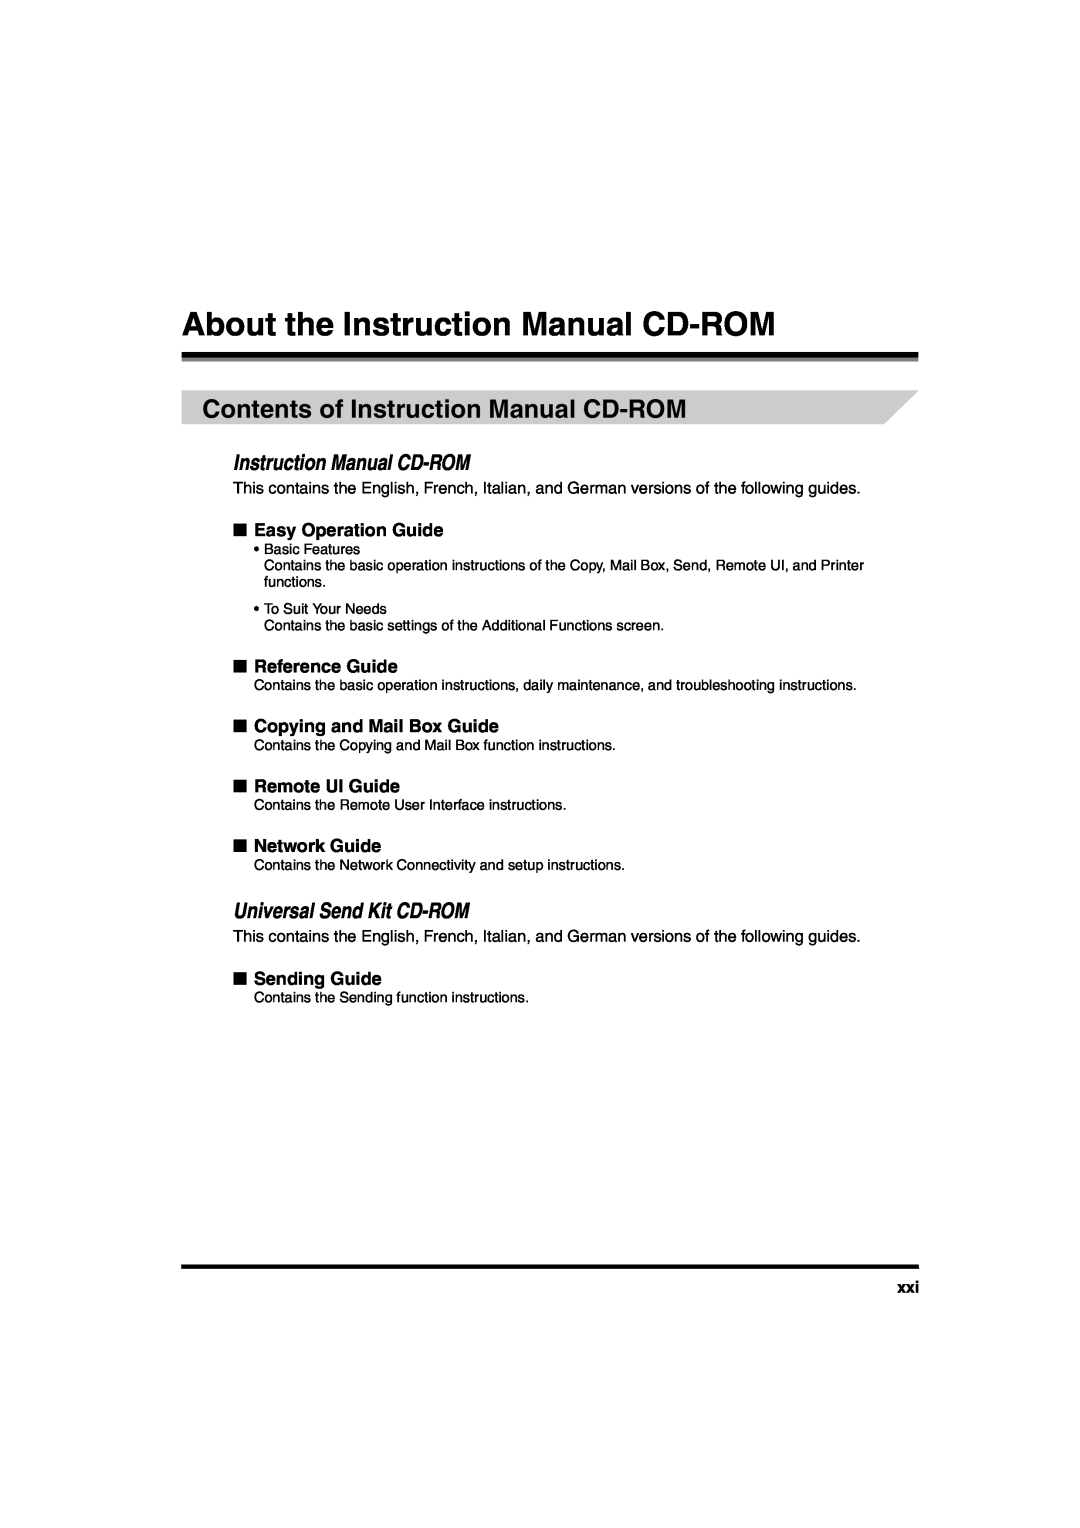 Canon iR6570 manual About the Instruction Manual CD-ROM, Contents of Instruction Manual CD-ROM, Universal Send Kit CD-ROM 